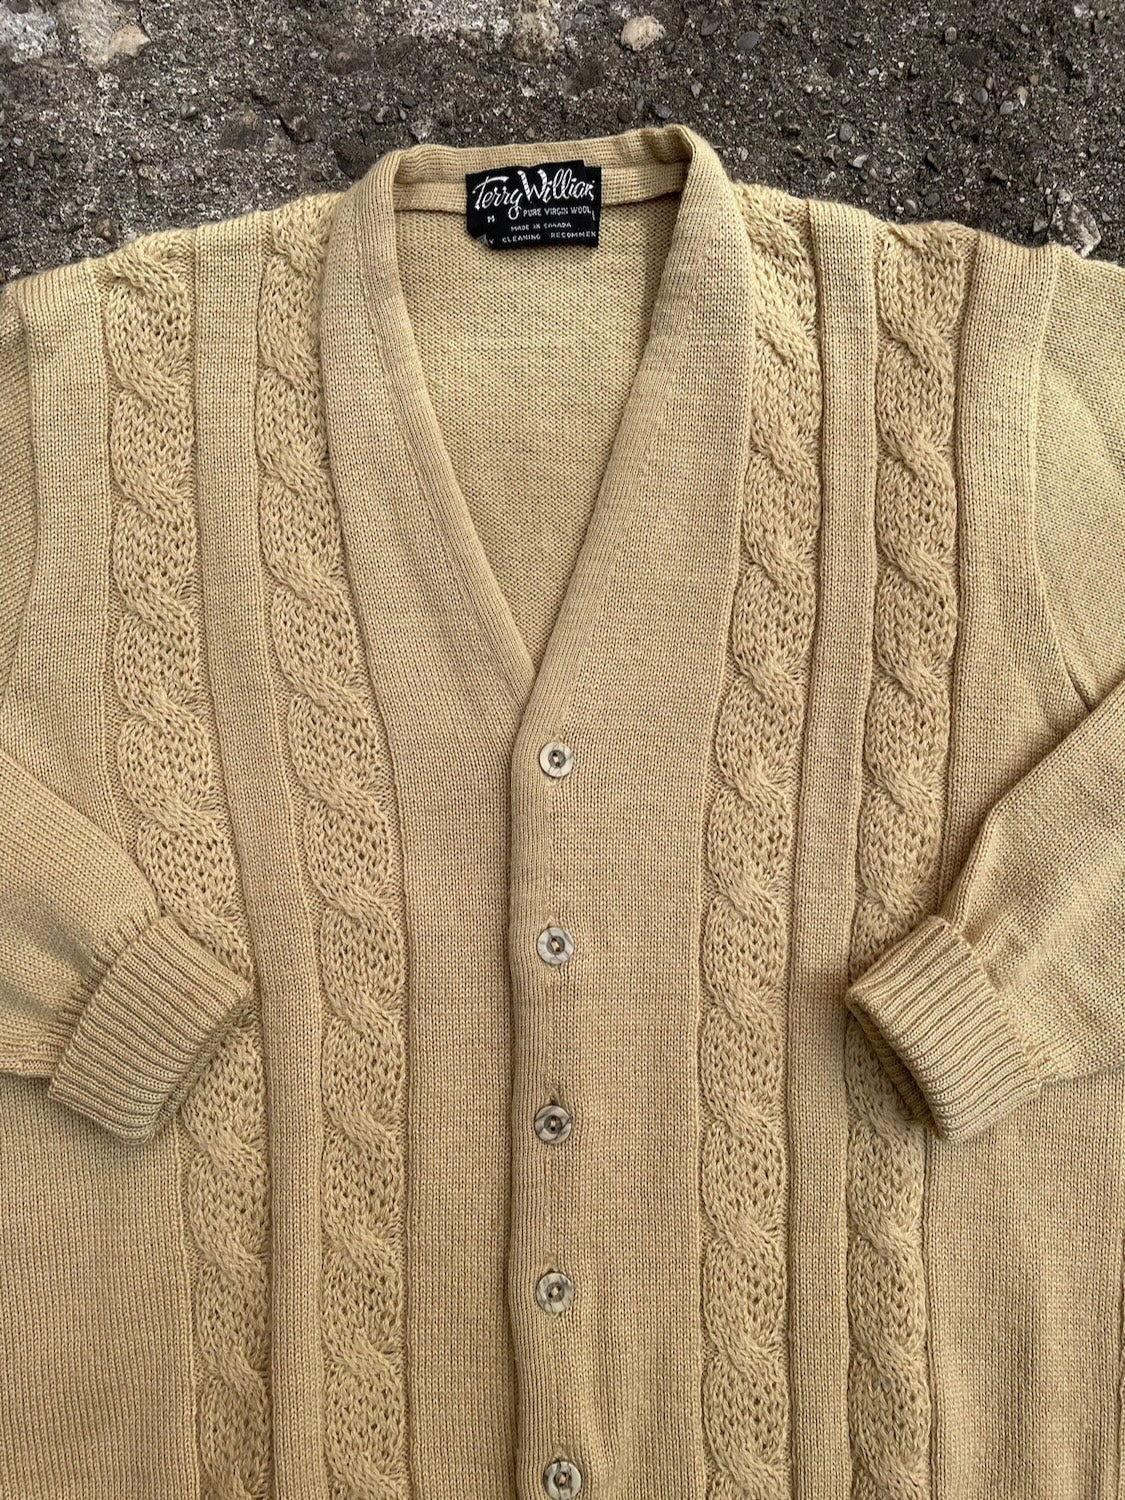 1960's/1970's Terry Williams Wool Knit Cardigan Sweater - M